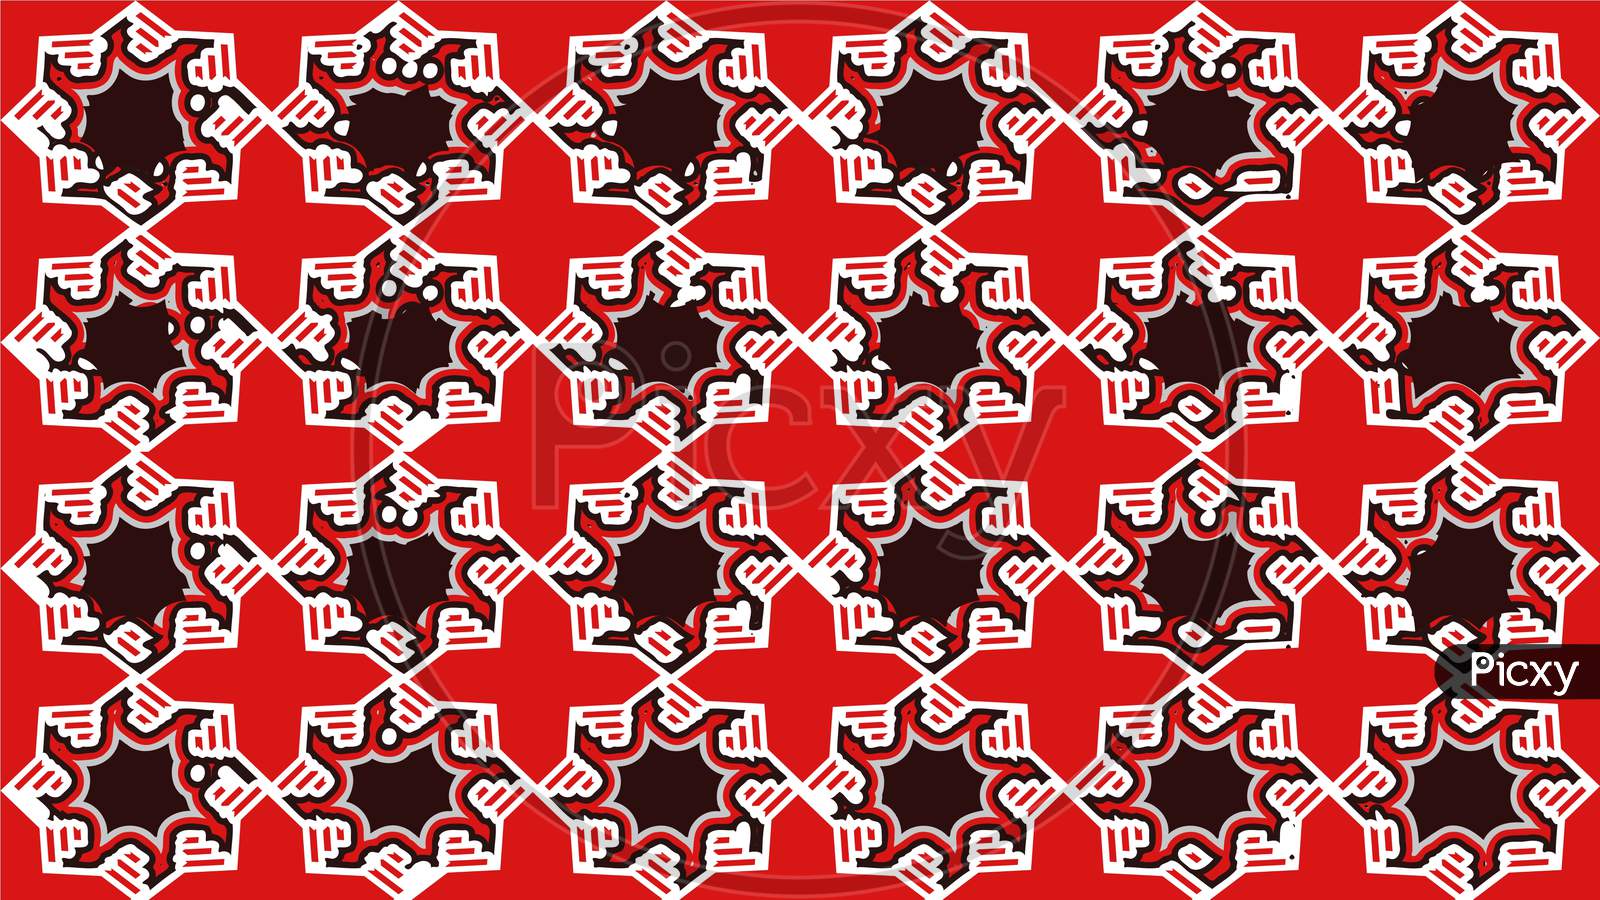 Image Of A Virus Pattern, Triangle Shape, Red Color, Graphic Design.